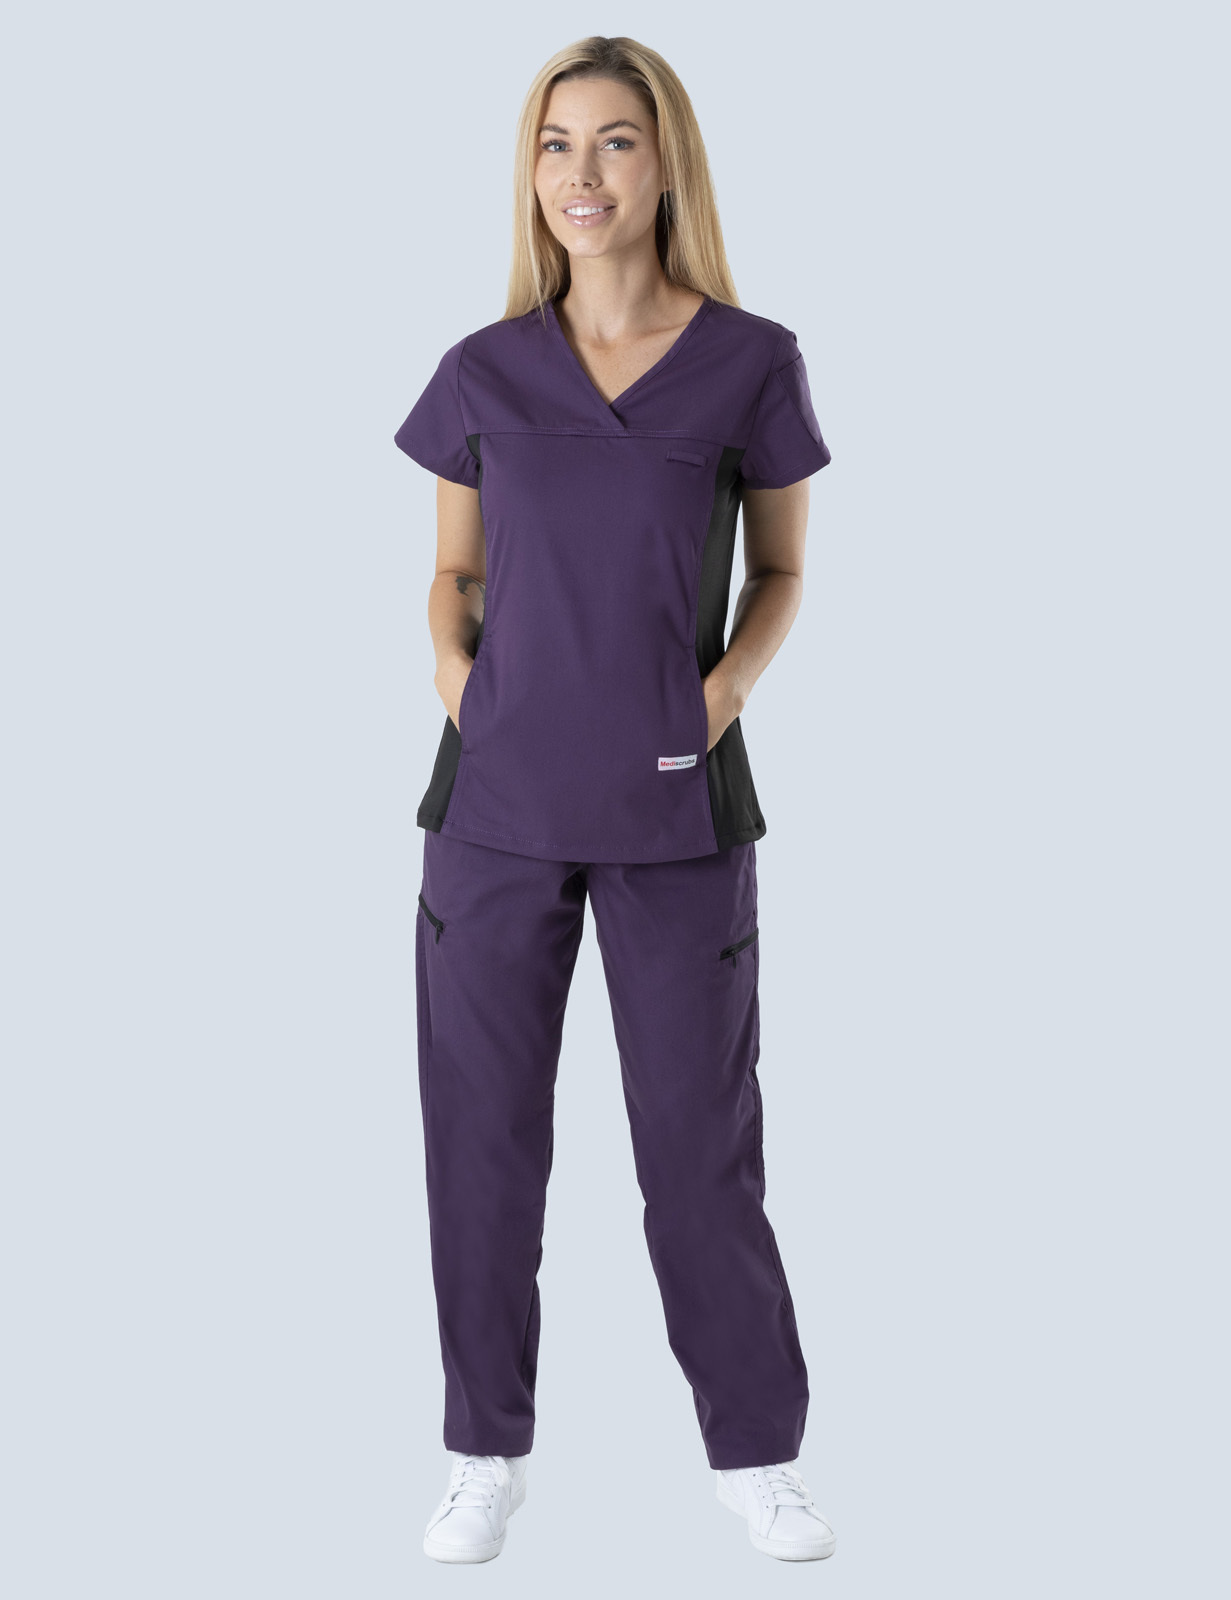 Gladstone Hospital - Dialysis Unit (Women's Fit Spandex Scrub Top and Cargo Pants in Aubergine incl Logos)